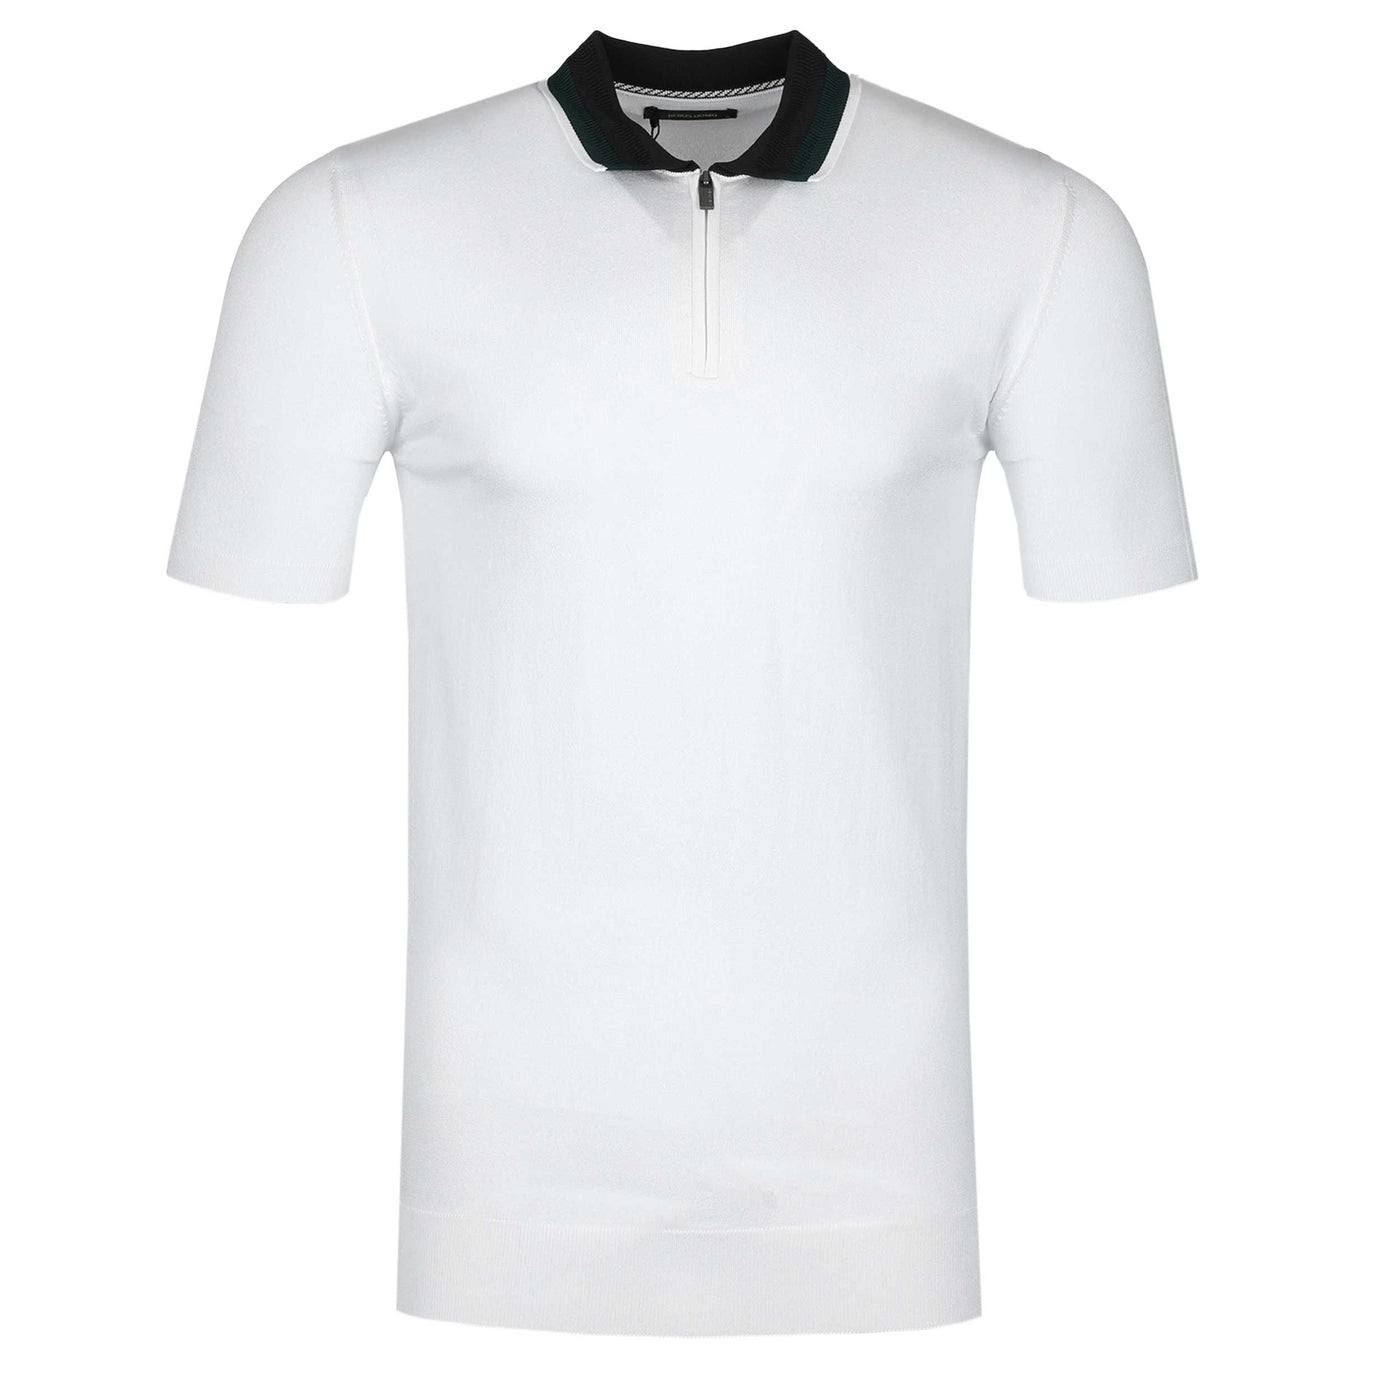 Remus Uomo Contrast Collar Knitted Zip Polo Shirt in White